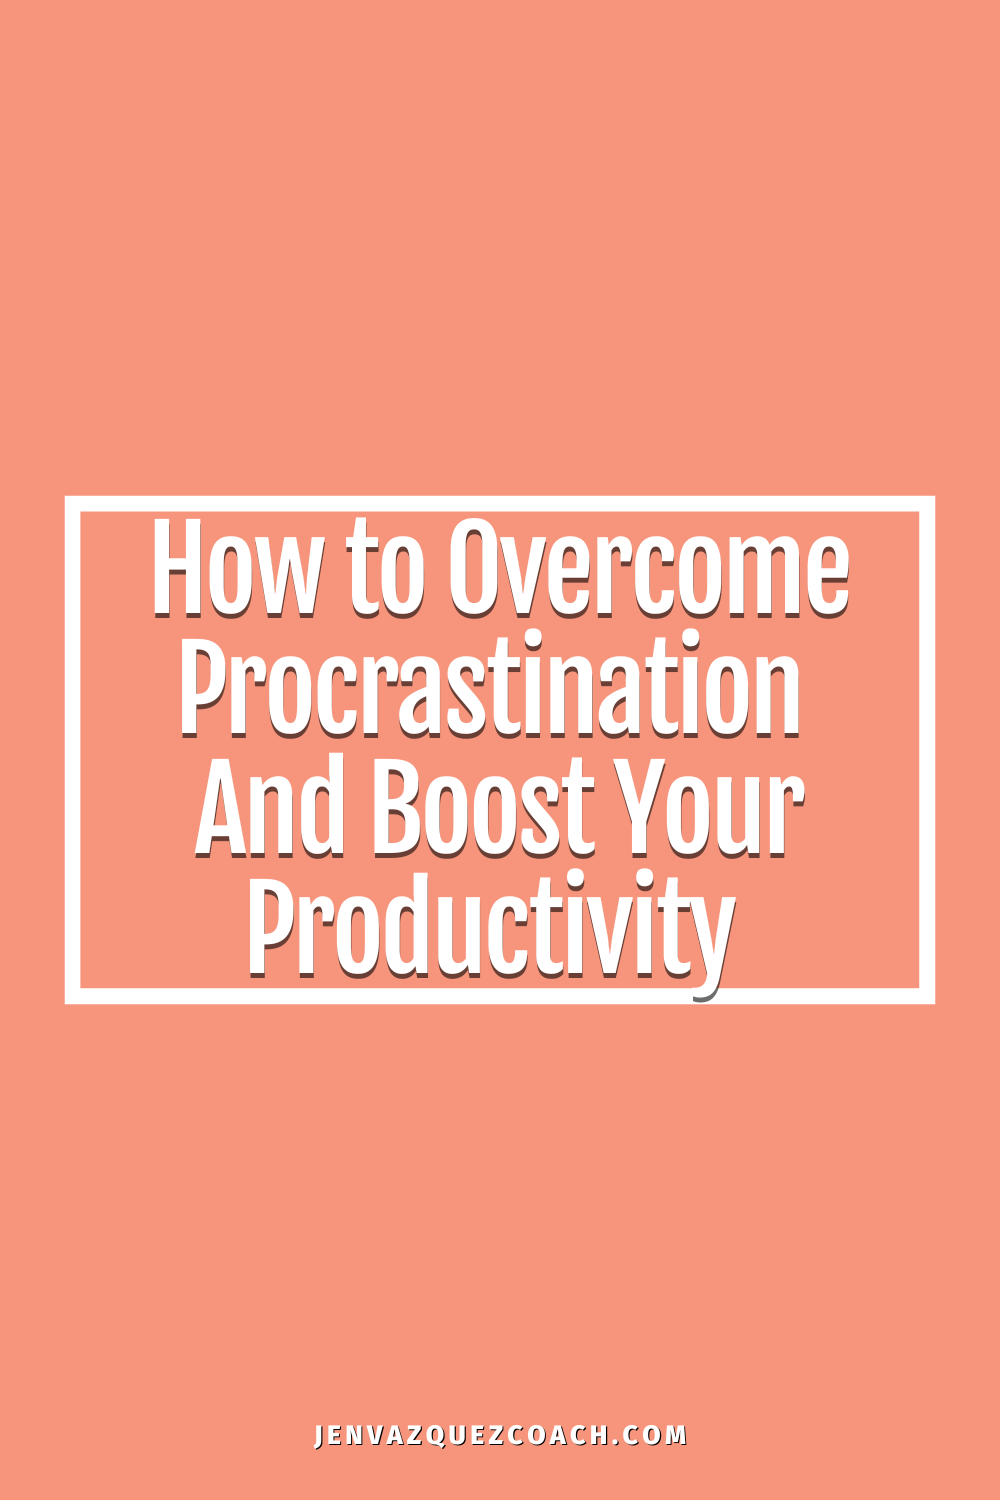 How To Overcome Procrastination and Boost Your Productivity as a Service Provider by Jen Vazquez Media